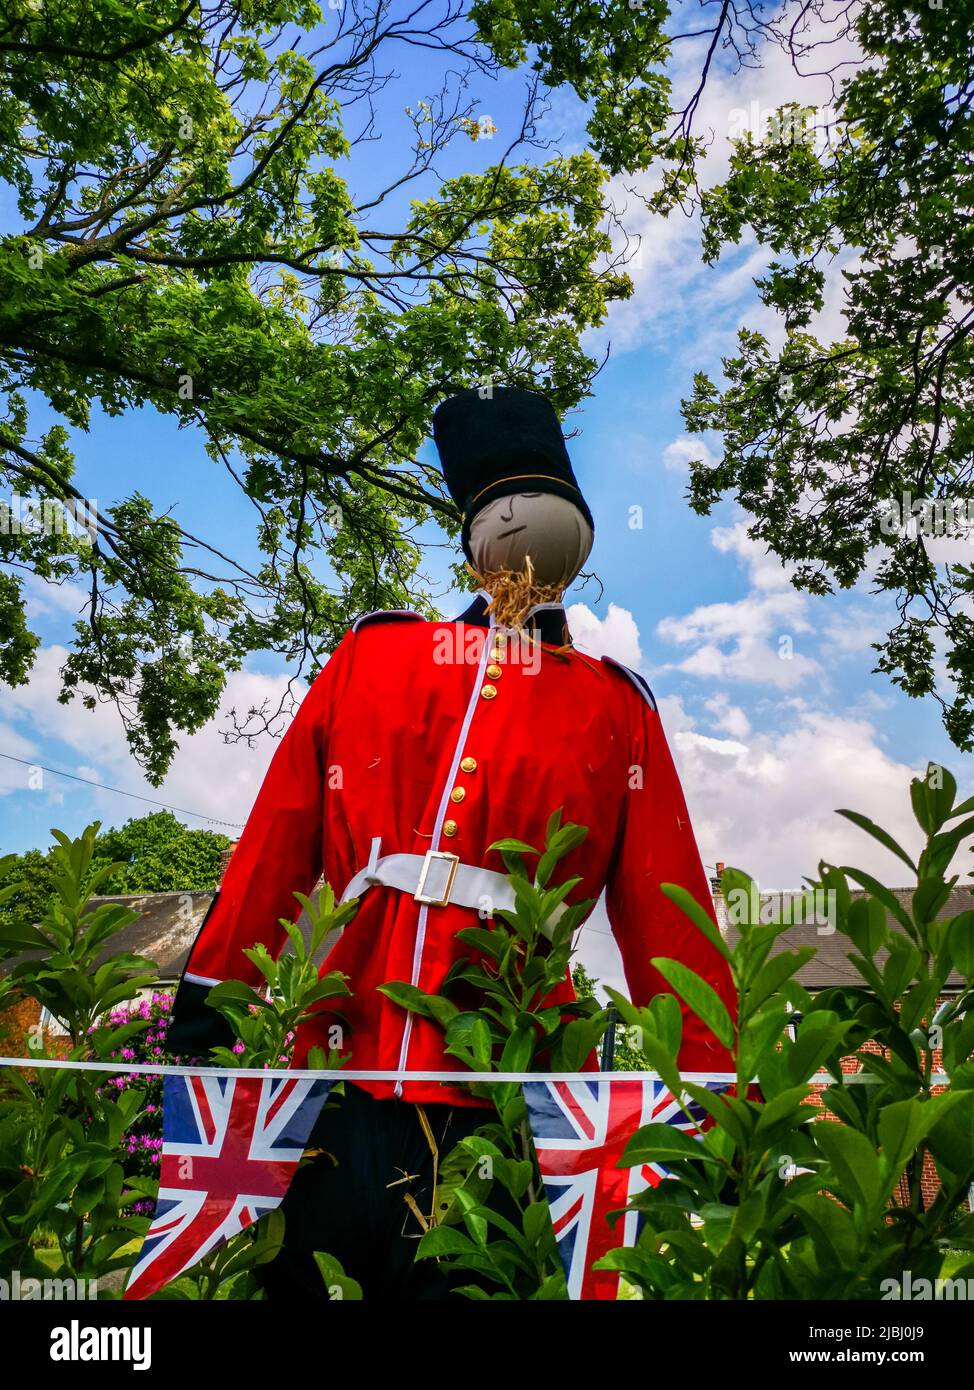 Soldier scarecrow in a village garden during the platinum jubilee. Stock Photo